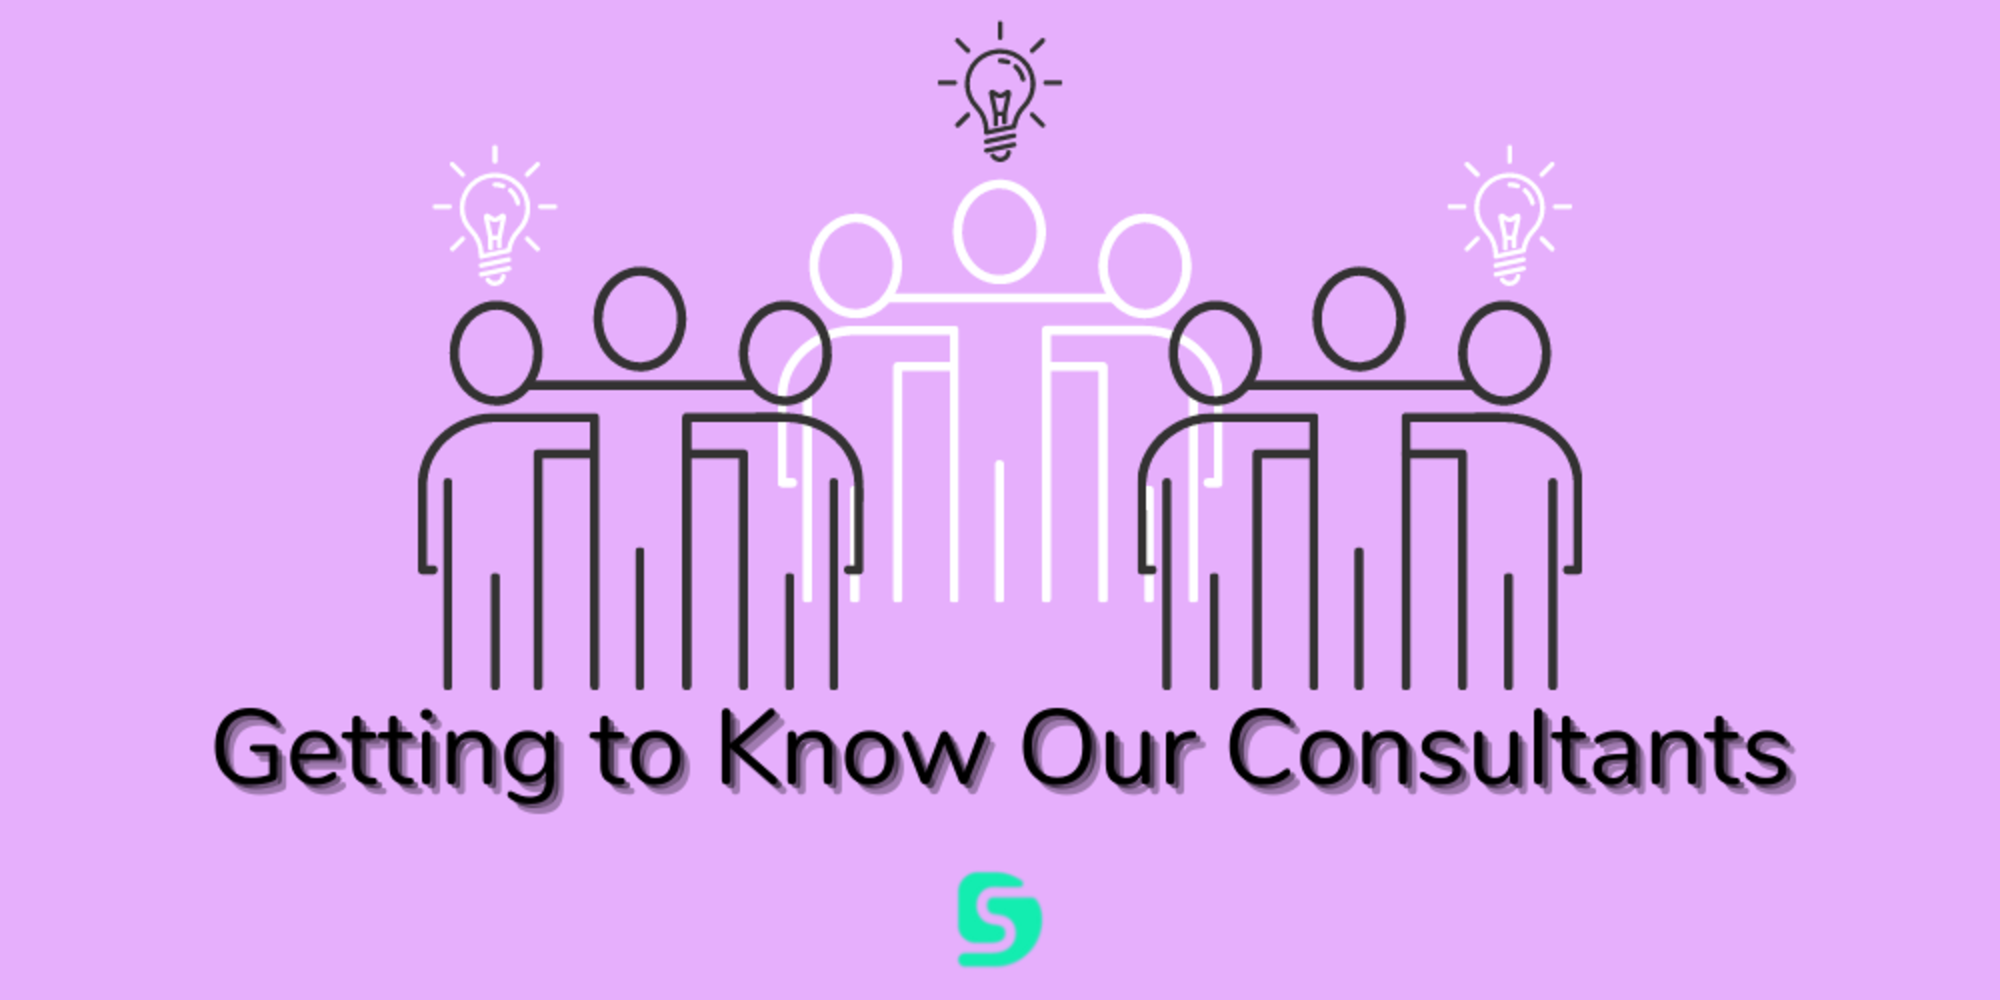 Getting To Know Our Consultants   10 Questions Over 10 Weeks (1)